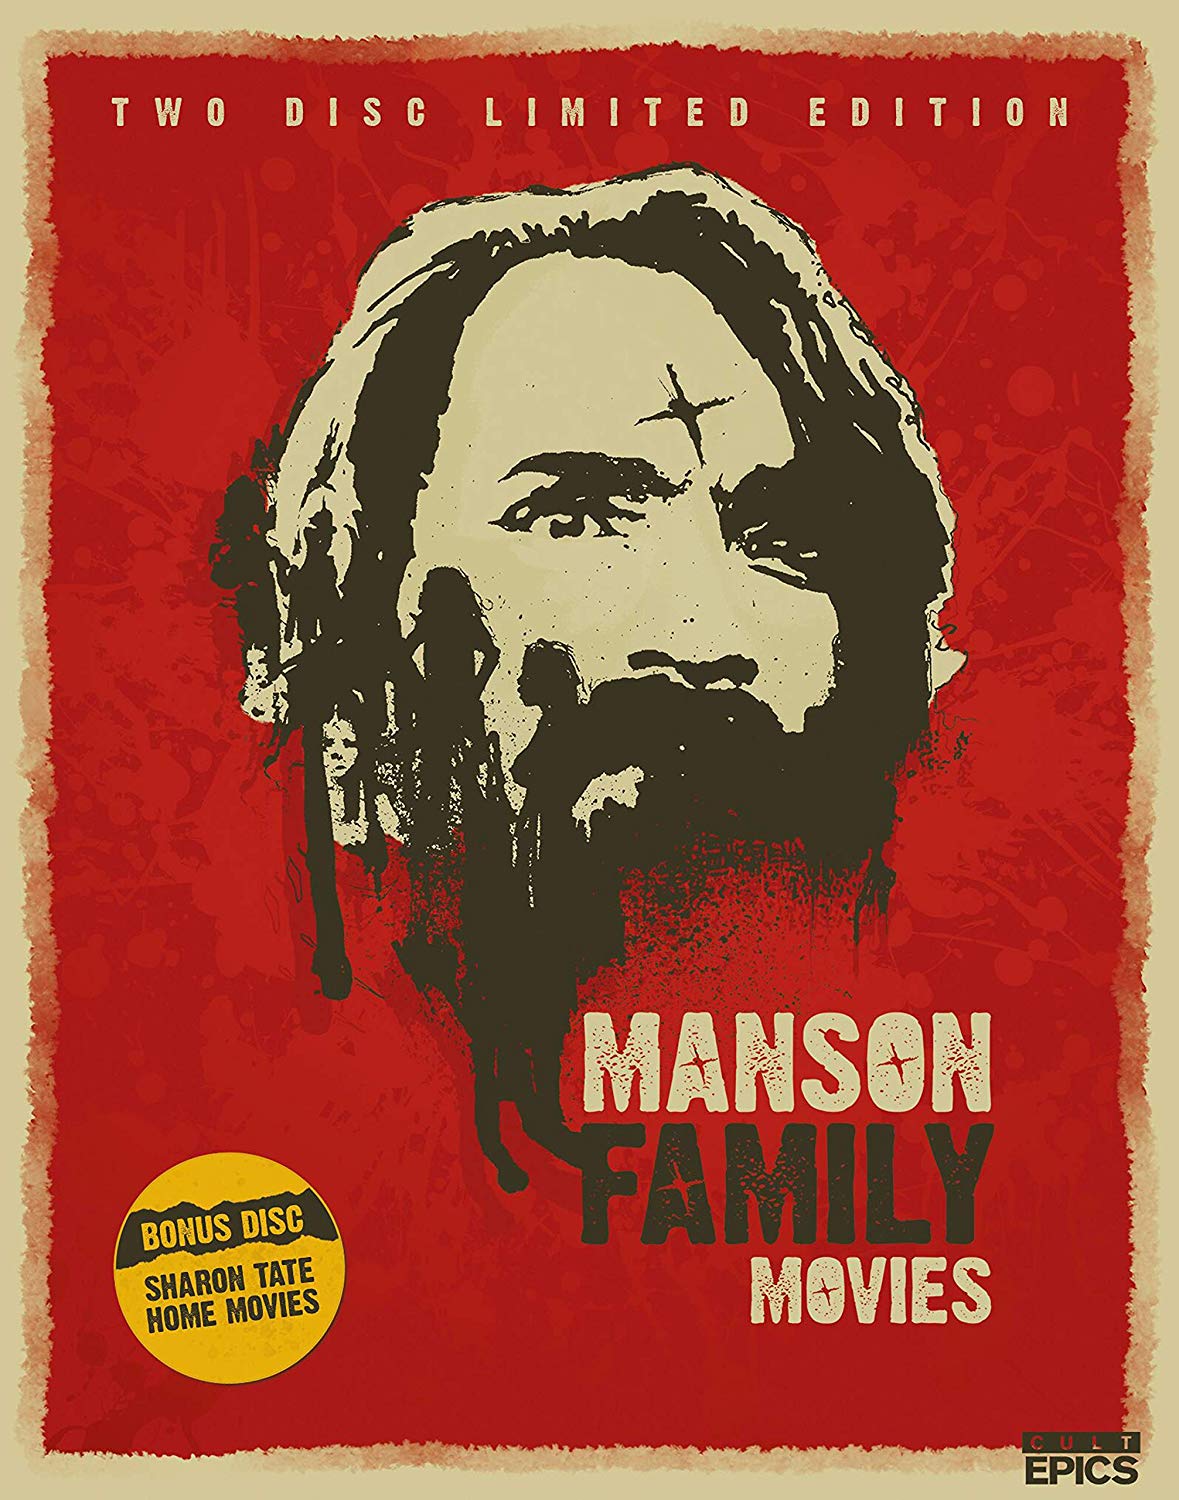 Manson Family Movies (2-Disc Limited Edition) Dvd